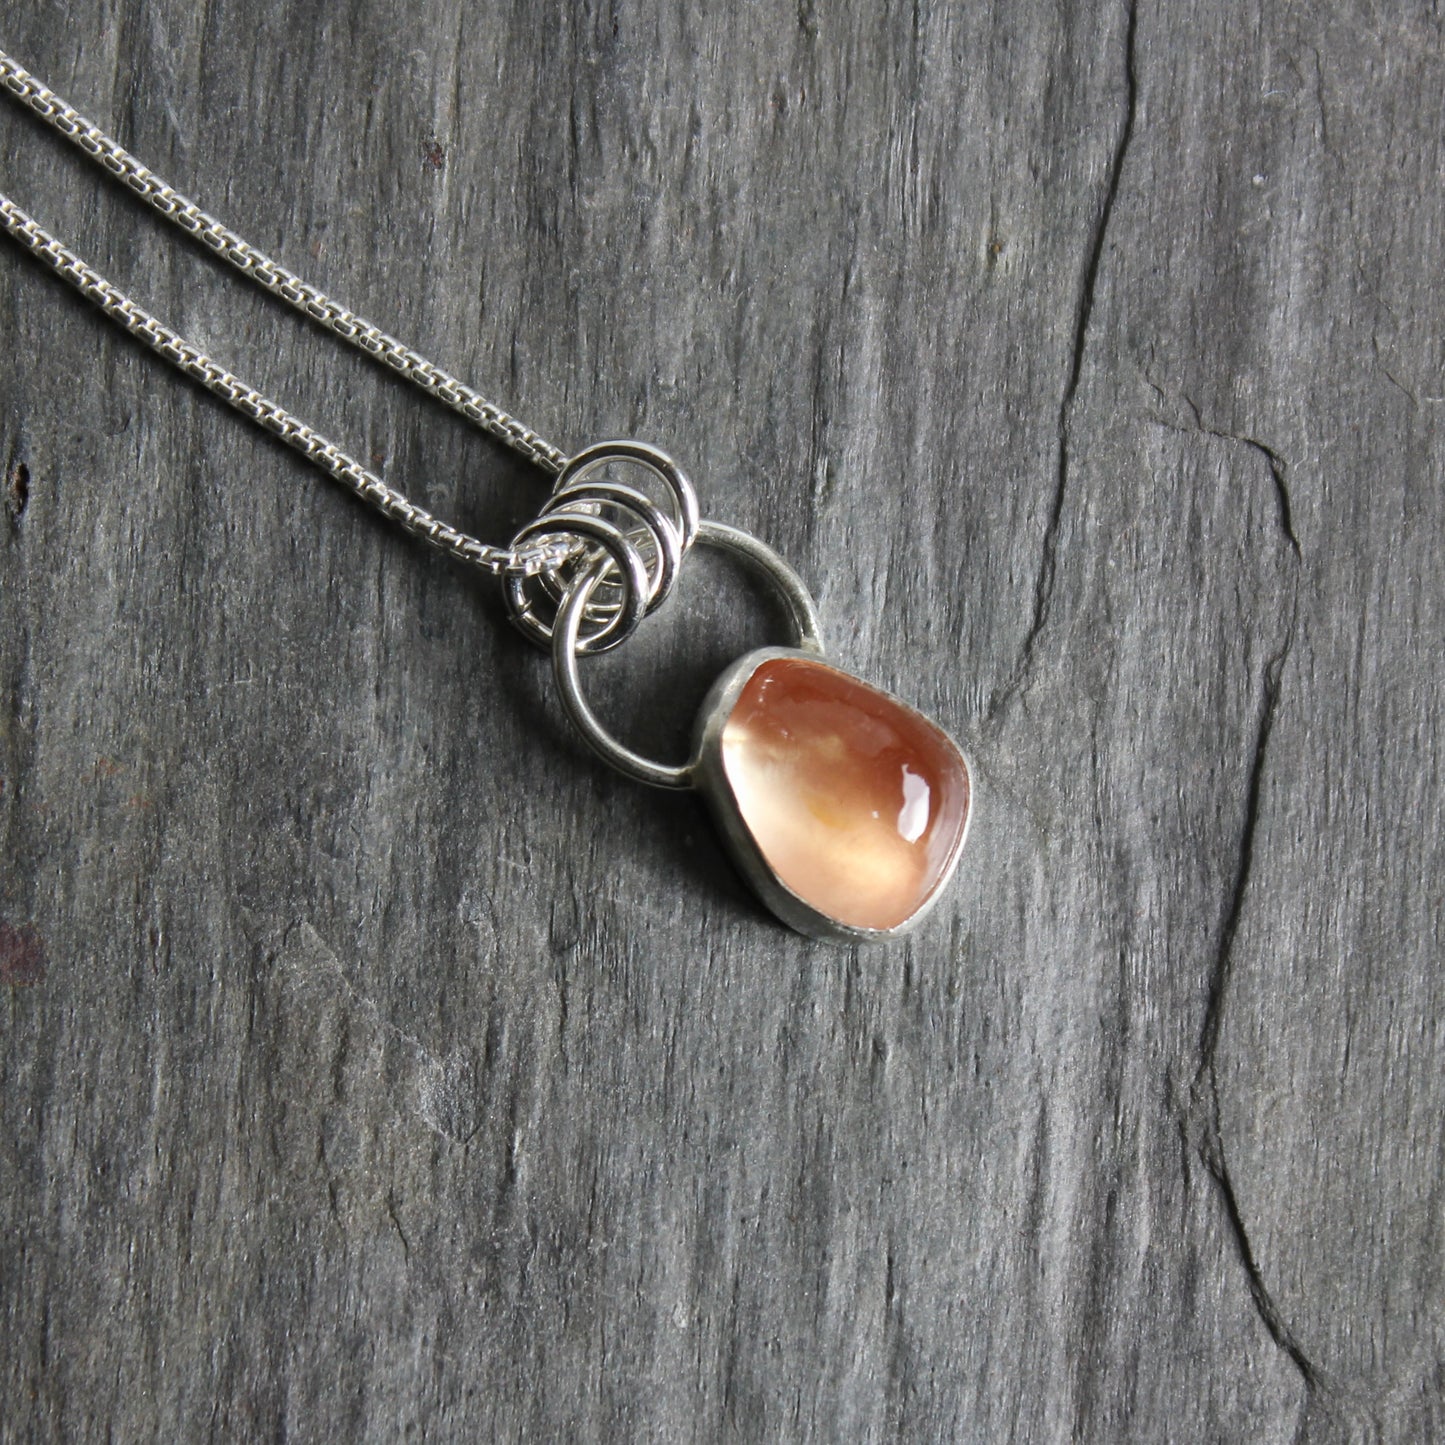 This small 10mm x 12mm peach Oregon sunstone is set in a fine & sterling silver bezel setting on an 18" chain. 